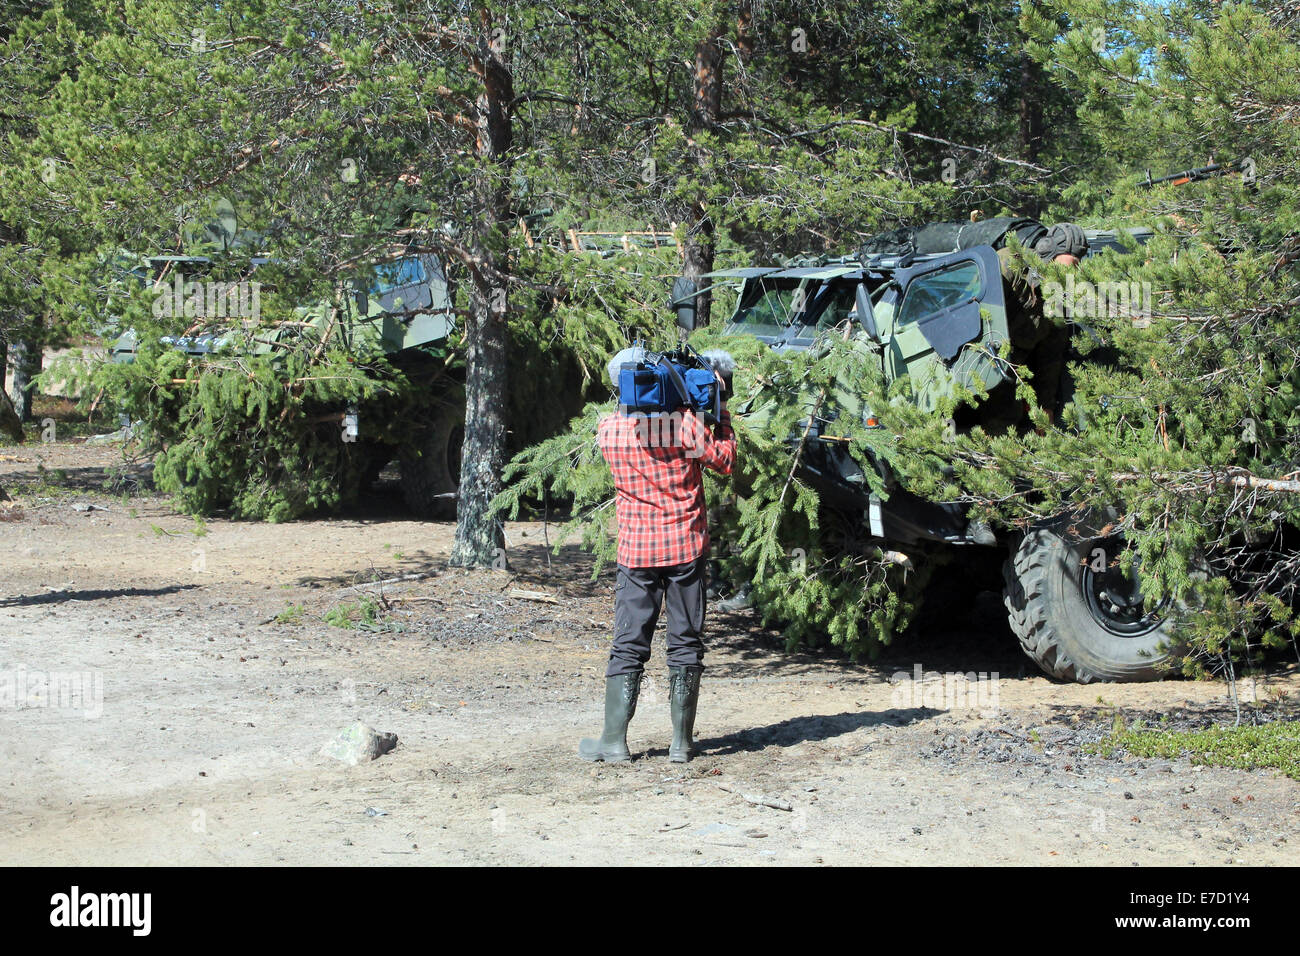 Camera man filming Finnish Defence Forces' vehicles Stock Photo